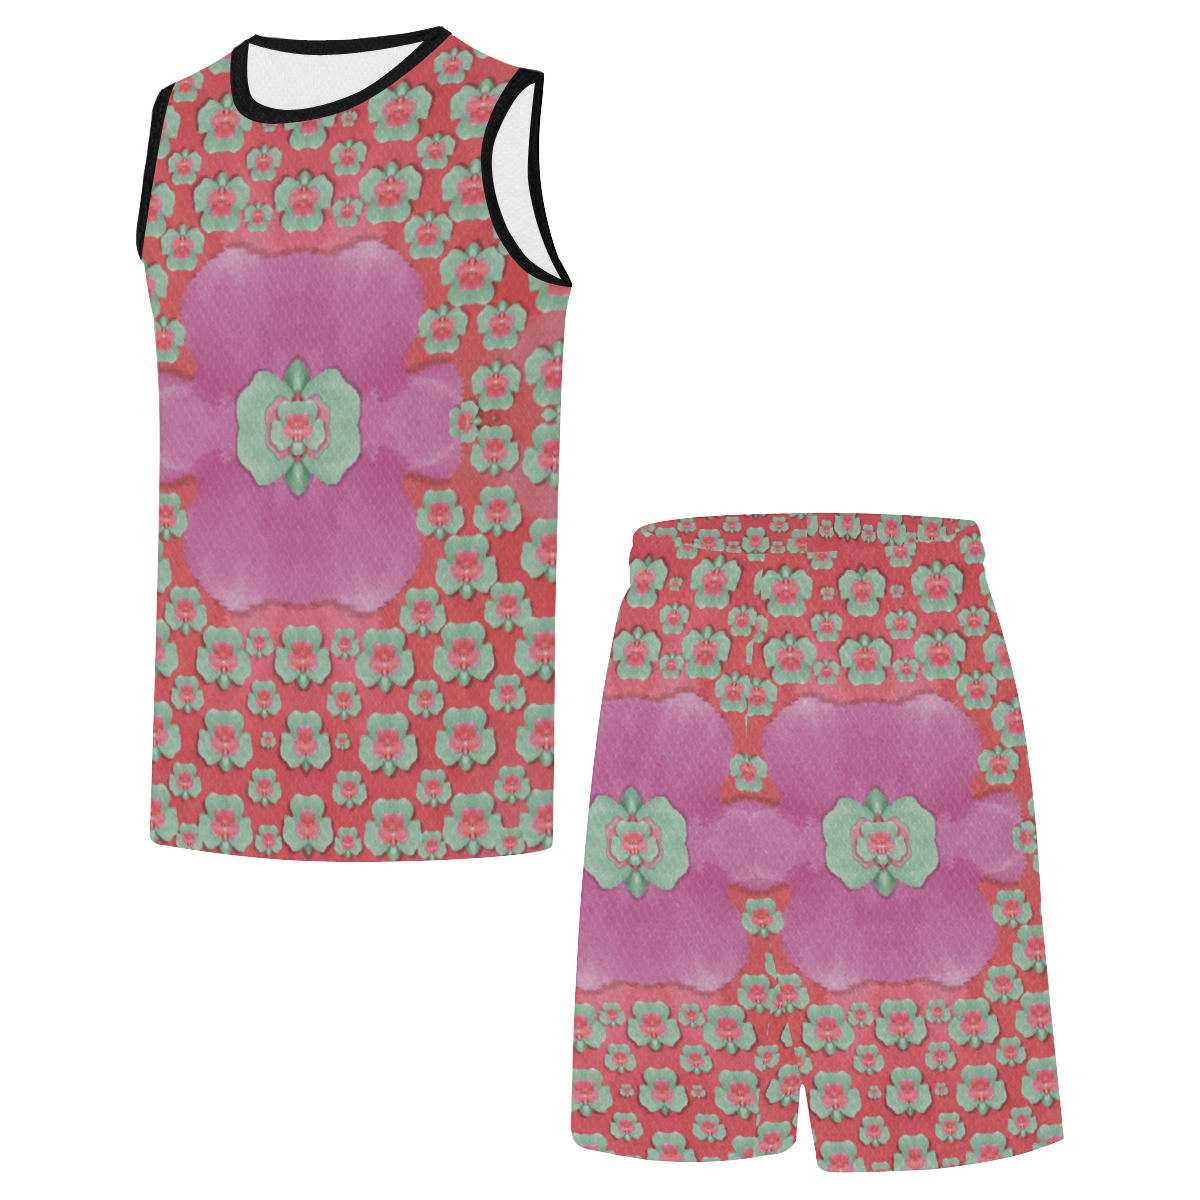 fantasy flowers in everything All Over Print Basketball Uniform